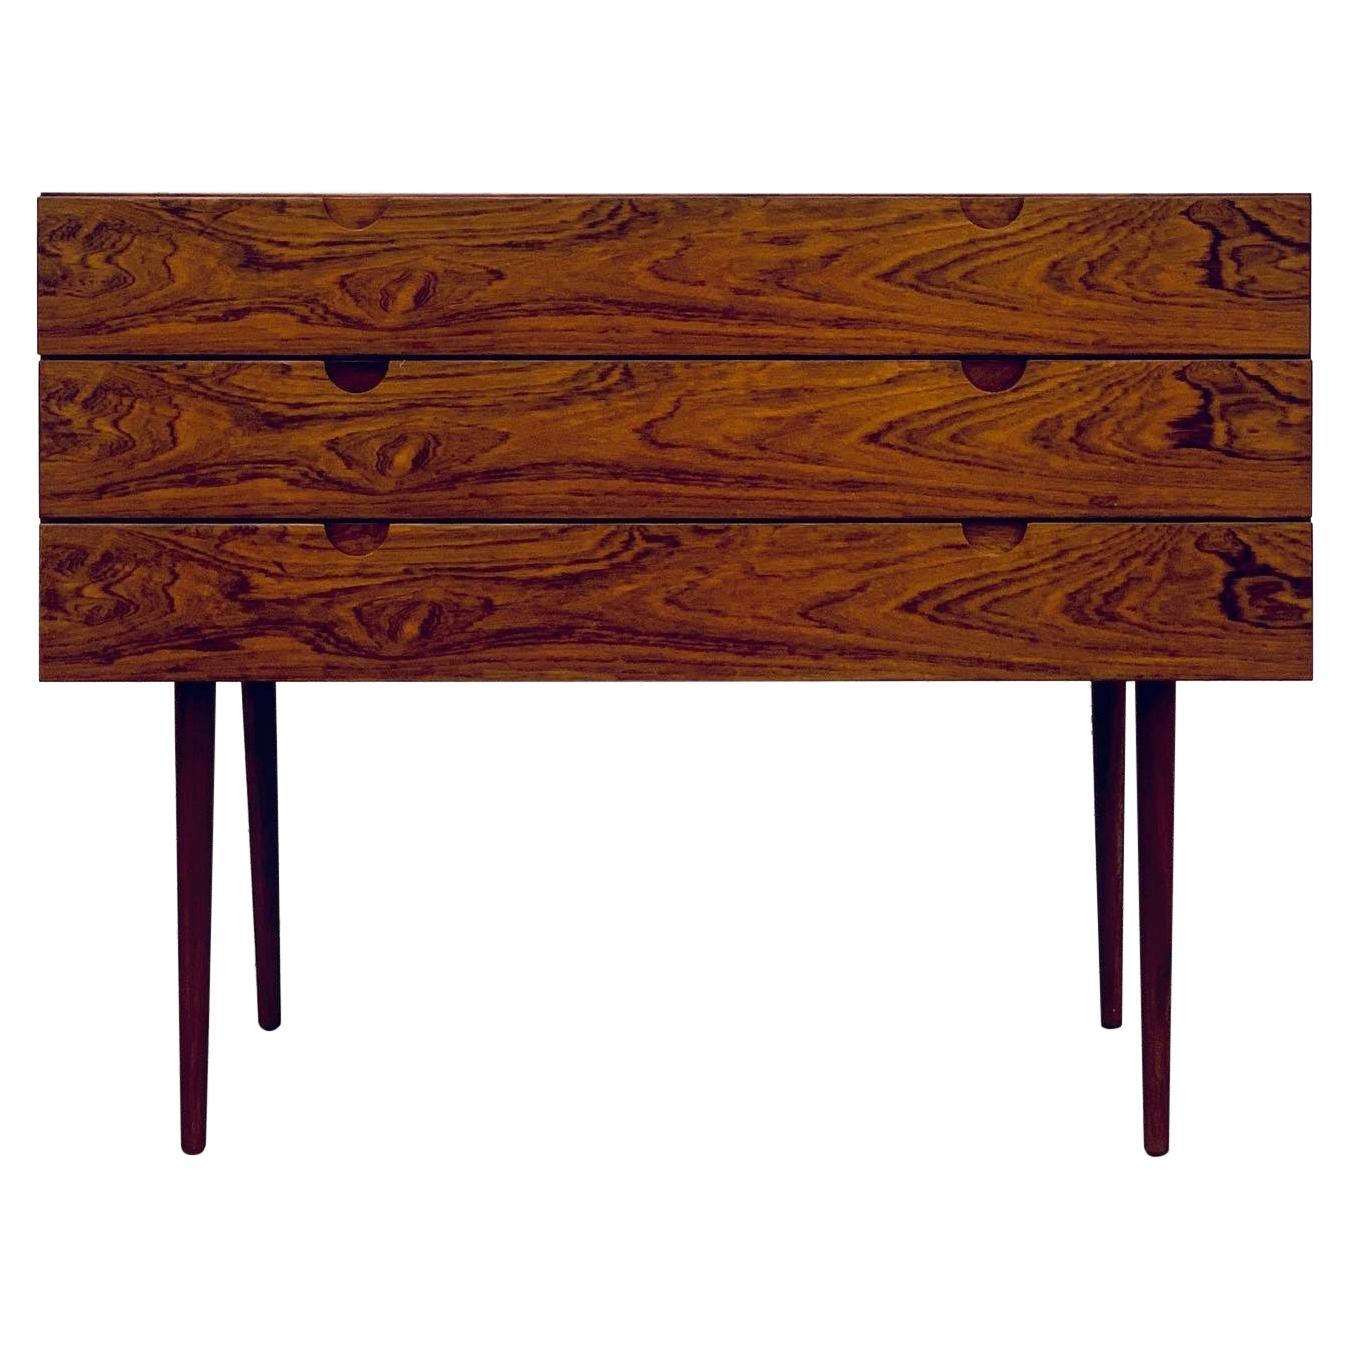 Credenza/sideboard featuring iconic handles by Bramin, three drawers, tall sleeks tapered legs

(This only ships to EU).